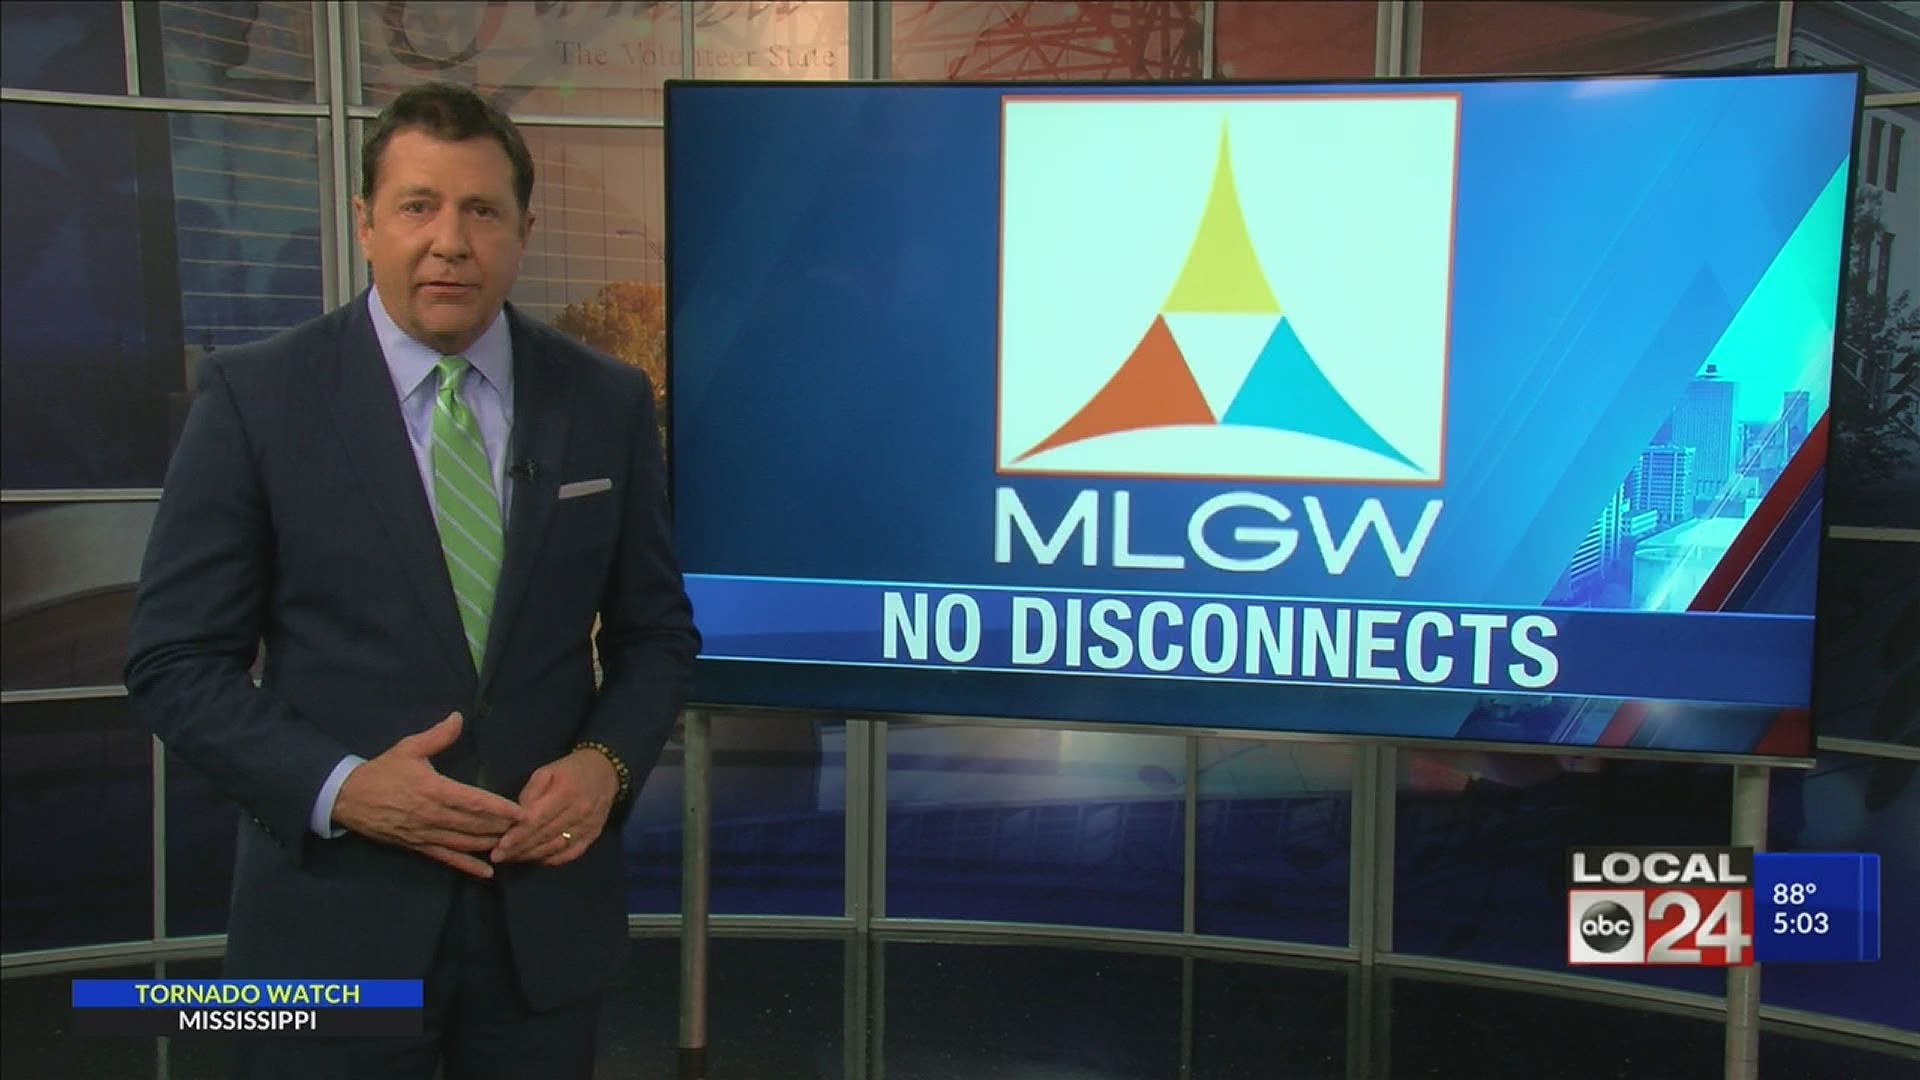 Customers of the Memphis utility were scrambling to make payments when MLGW resumed disconnections last week.